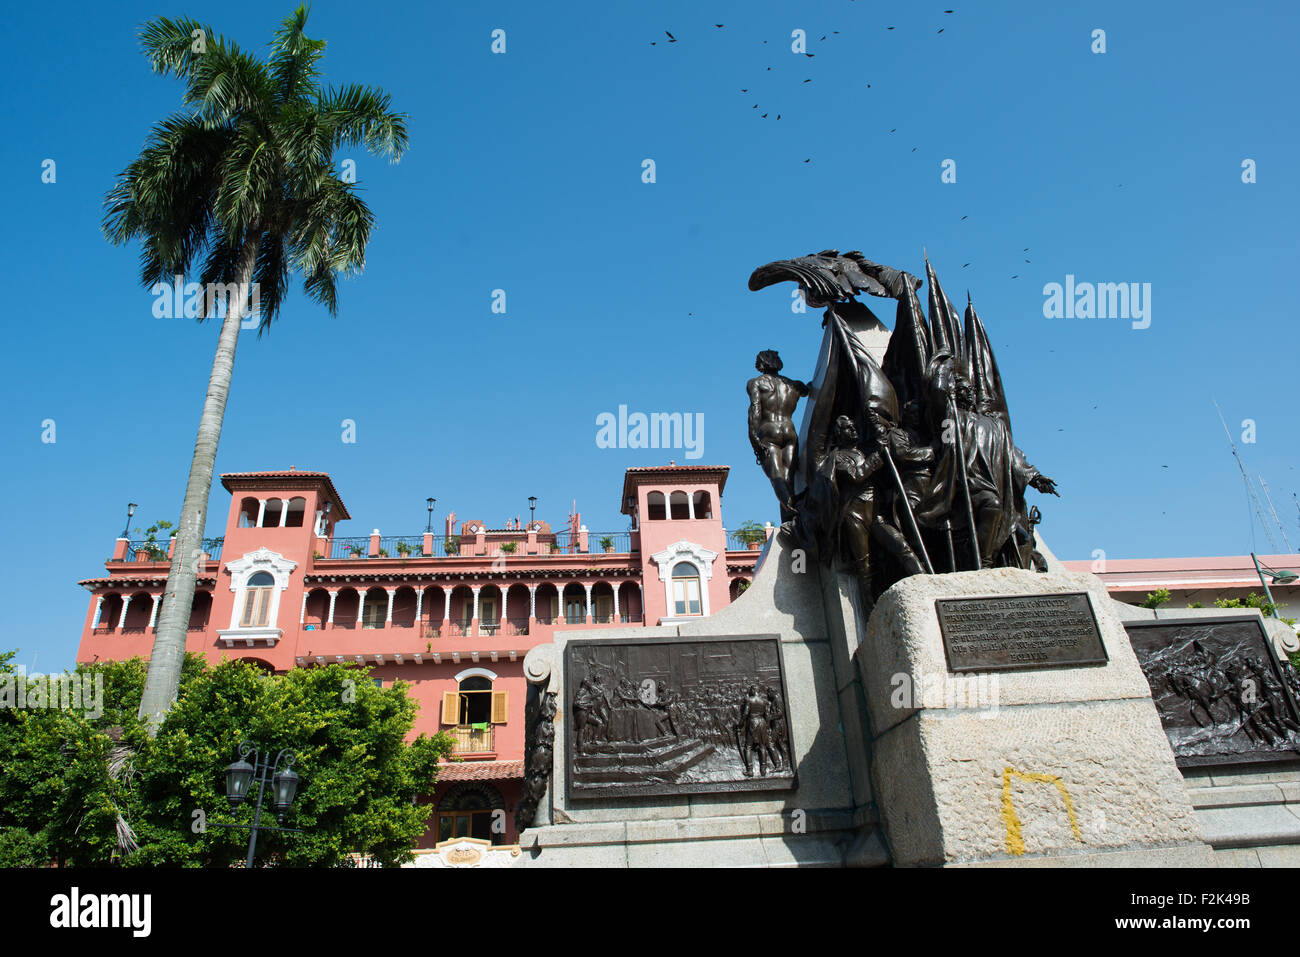 PANAMA CITY, Panama--Surrounded by 19th century architecture, Plaza Simon Bolivar is a small public square in Casco Viejo, a block from the waterfront. It is named after Venezuelan general Simón Bolívar, the 'Liberator of Latin America', and a statue of Bolivar stands prominently in the center of the square. Stock Photo